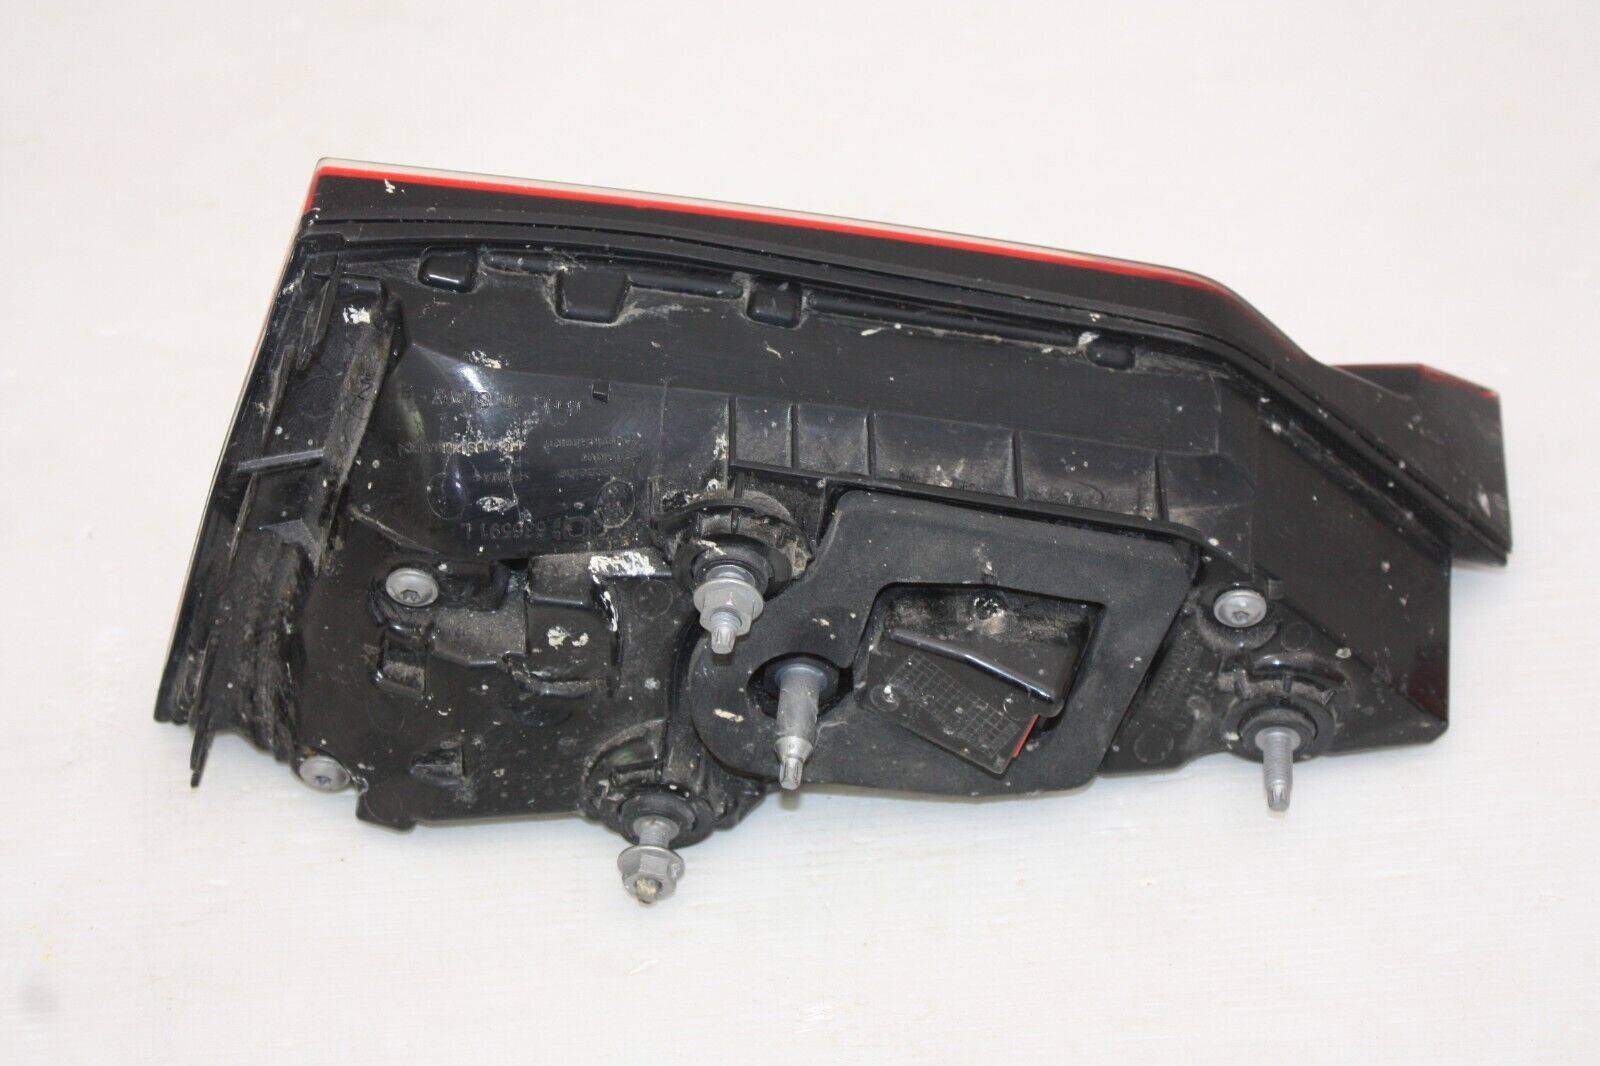 Audi-A5-S5-Left-Side-Tail-Light-2017-TO-2020-8W6945093D-Genuine-176032270893-6